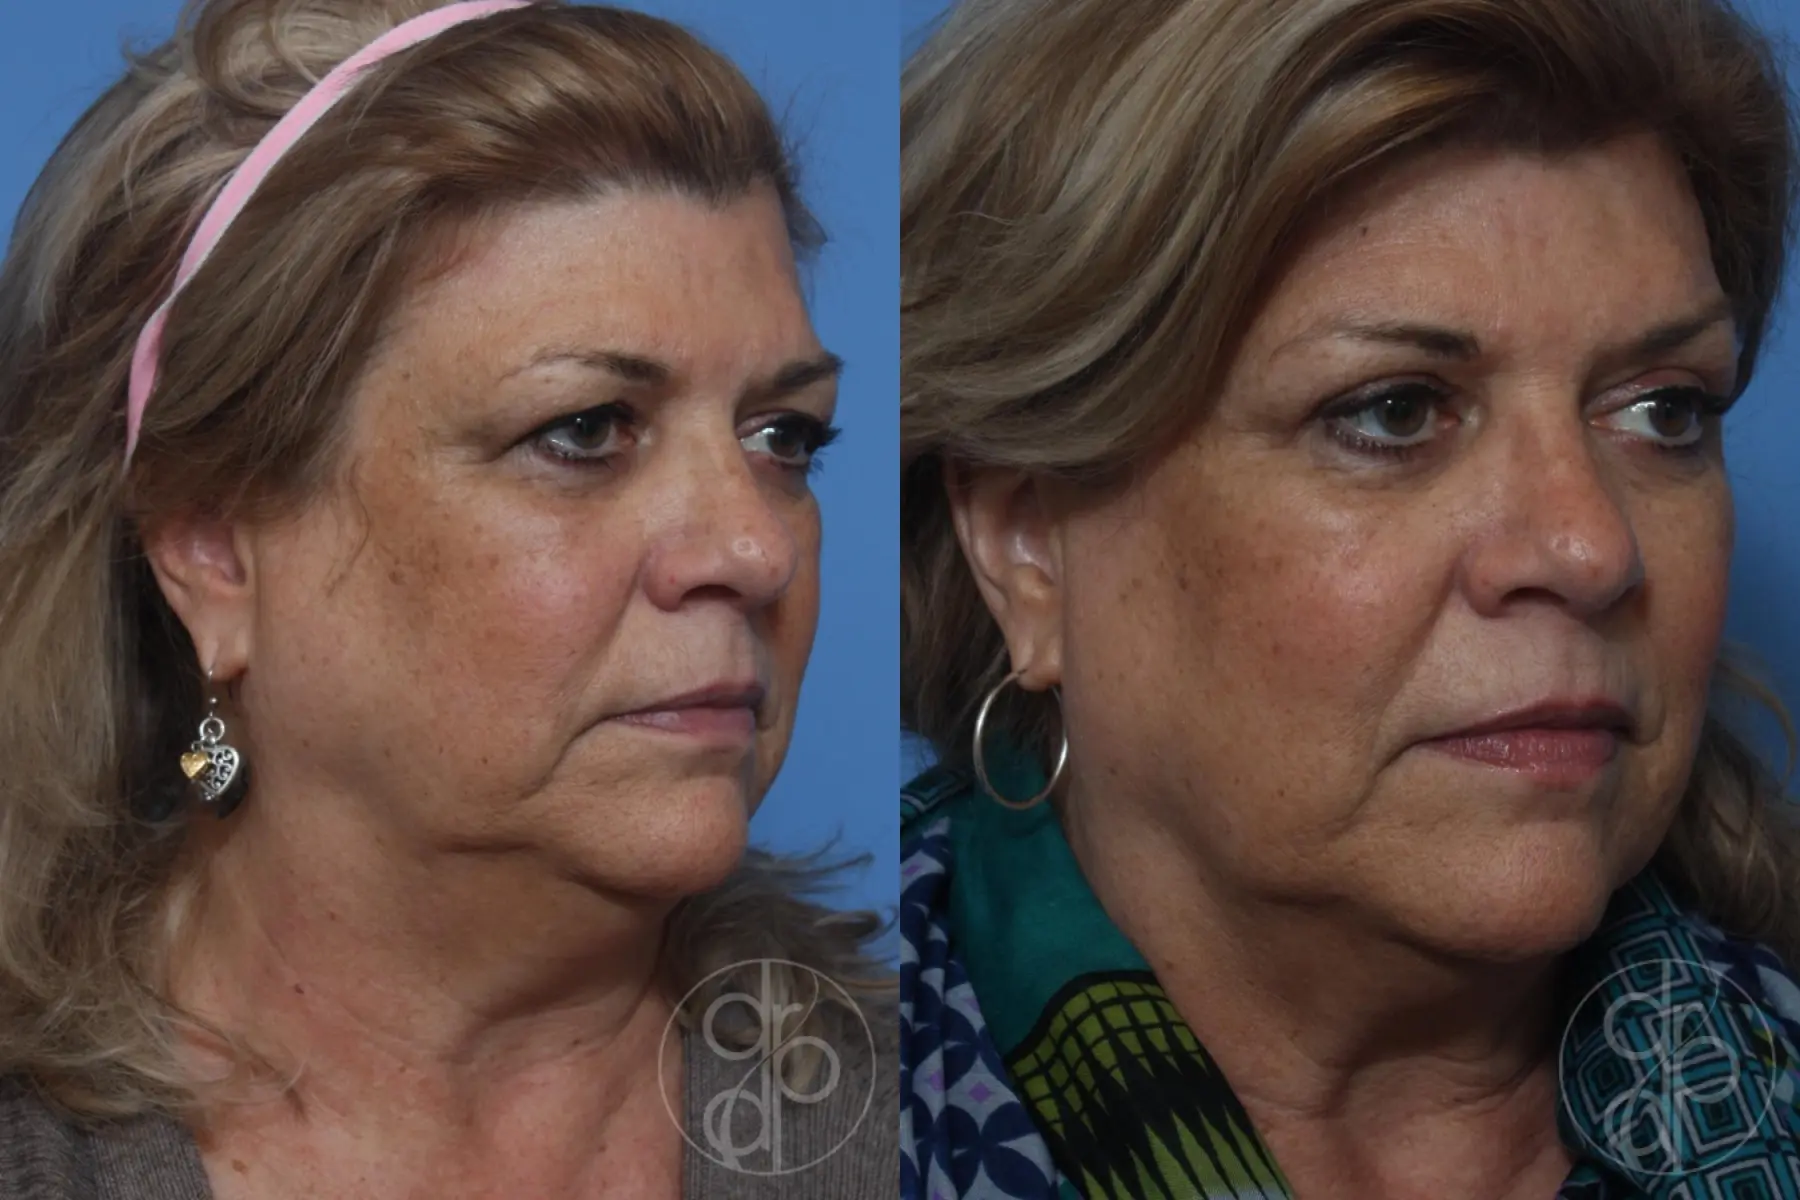 patient 10525 blepharoplasty before and after result - Before and After 2